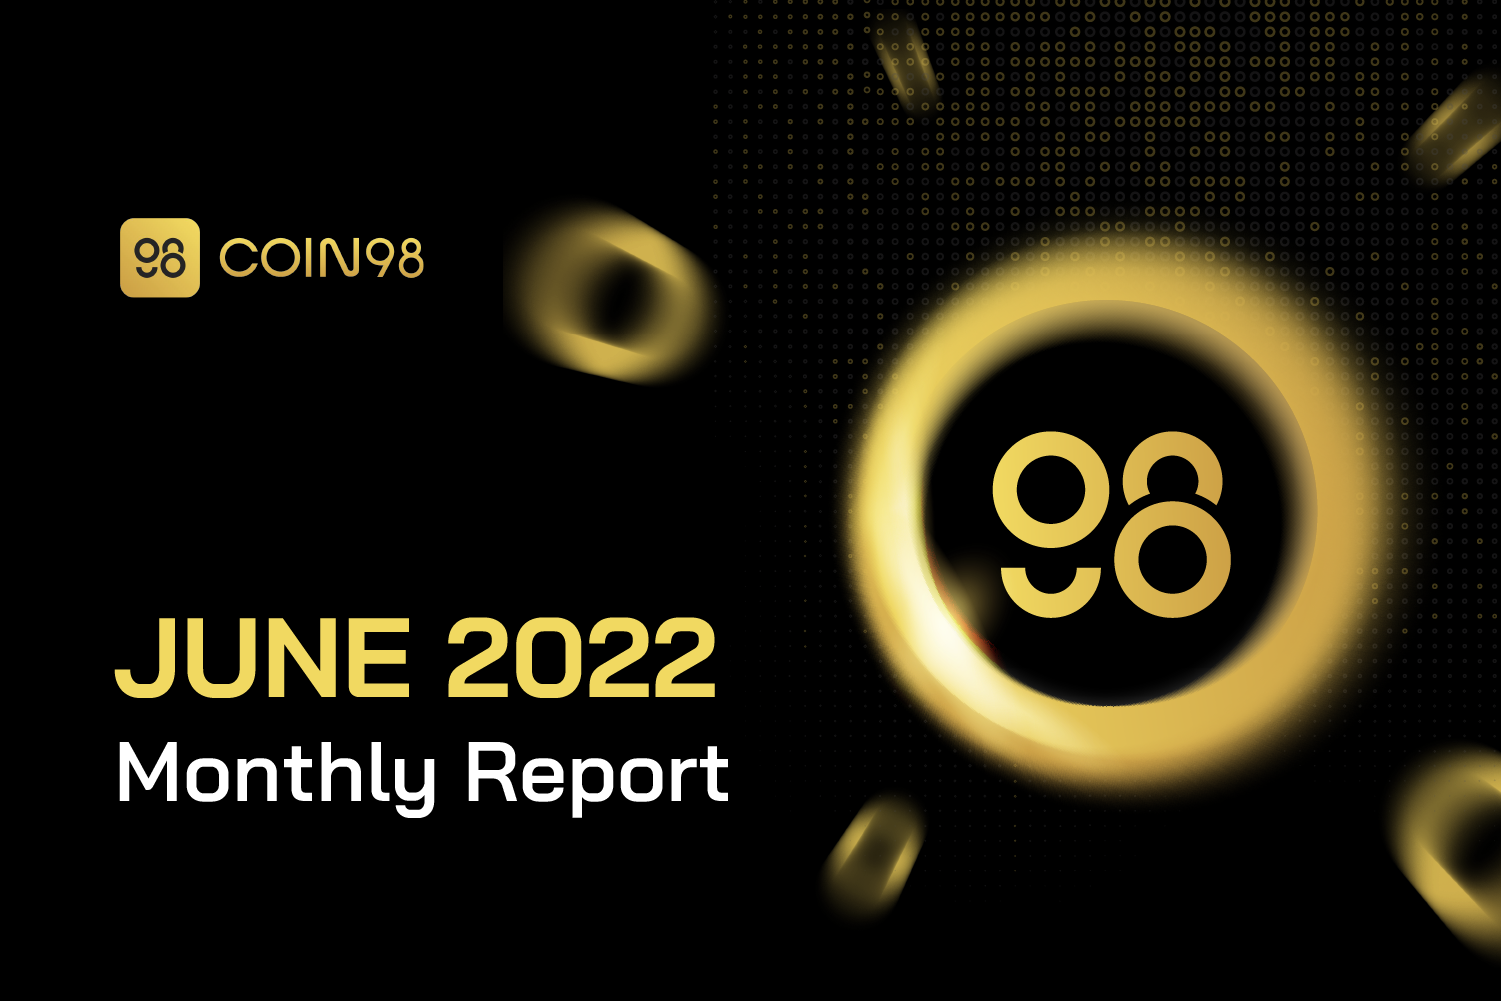 Coin98 Super App June 2022 | Highlights and Milestones